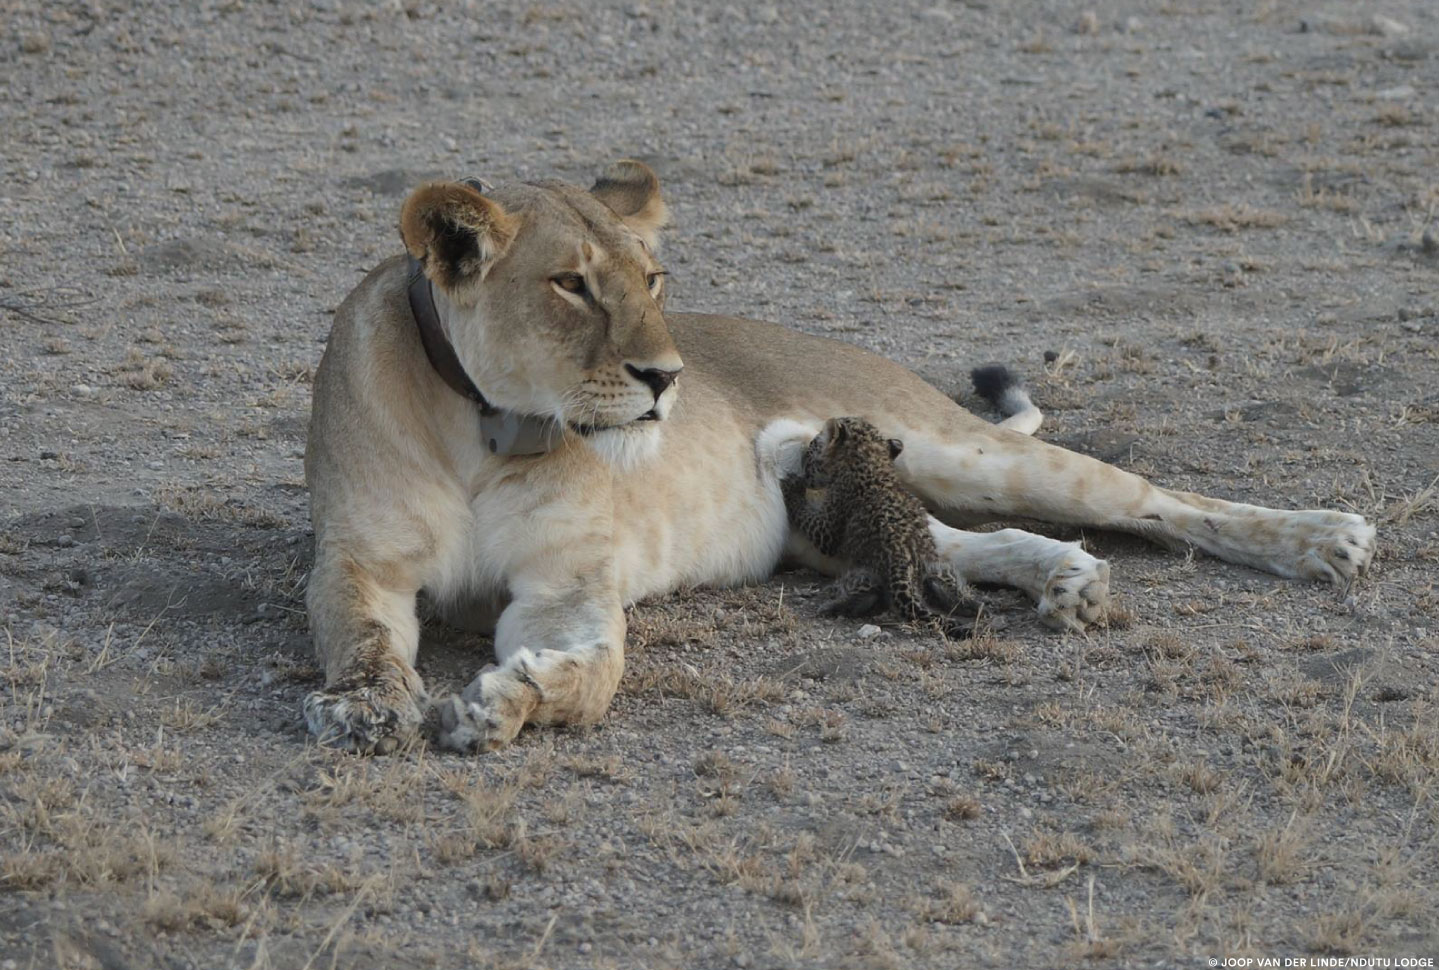 Lioness and Baby Leopard at Ndutu Lodge